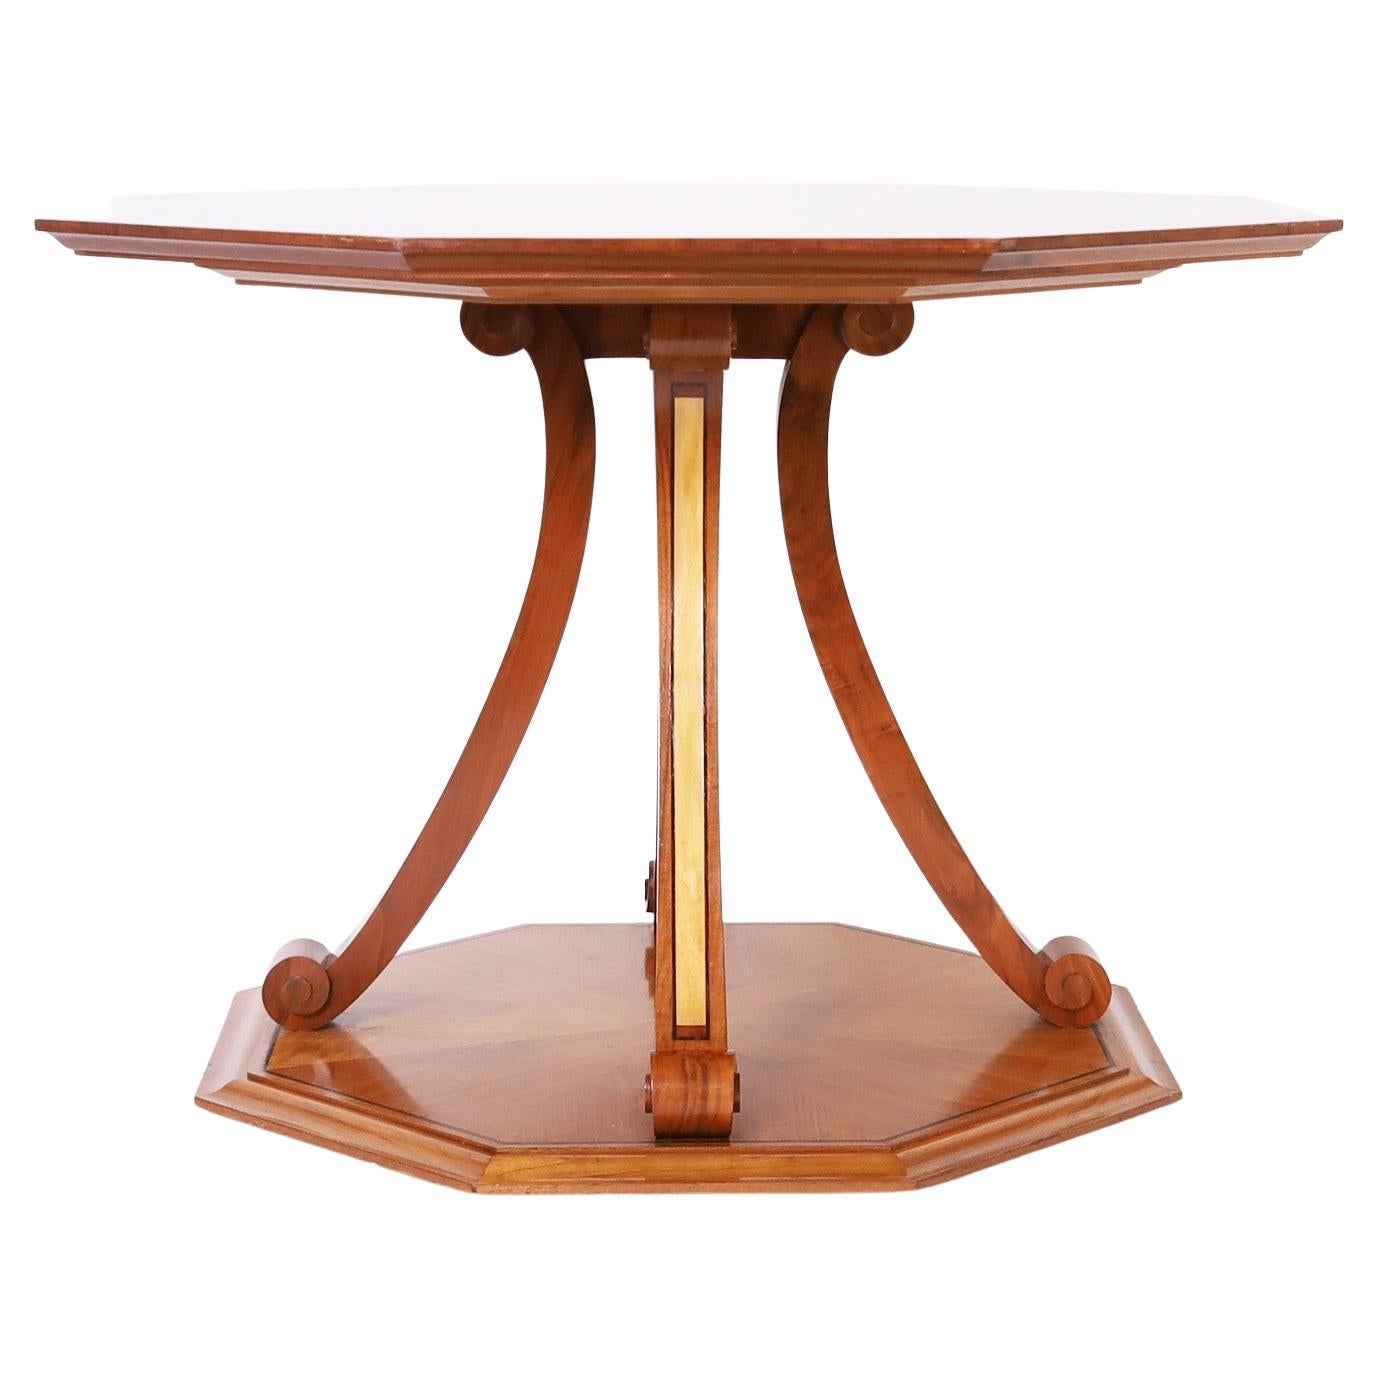 Unusual center table crafted in mahogany and walnut veneer with an octagon form top having a sunburst grain design with a floral border inlaid with Macassar ebony, satinwood, sycamore, and burl wood. The base has scrolled saber legs with inlays and